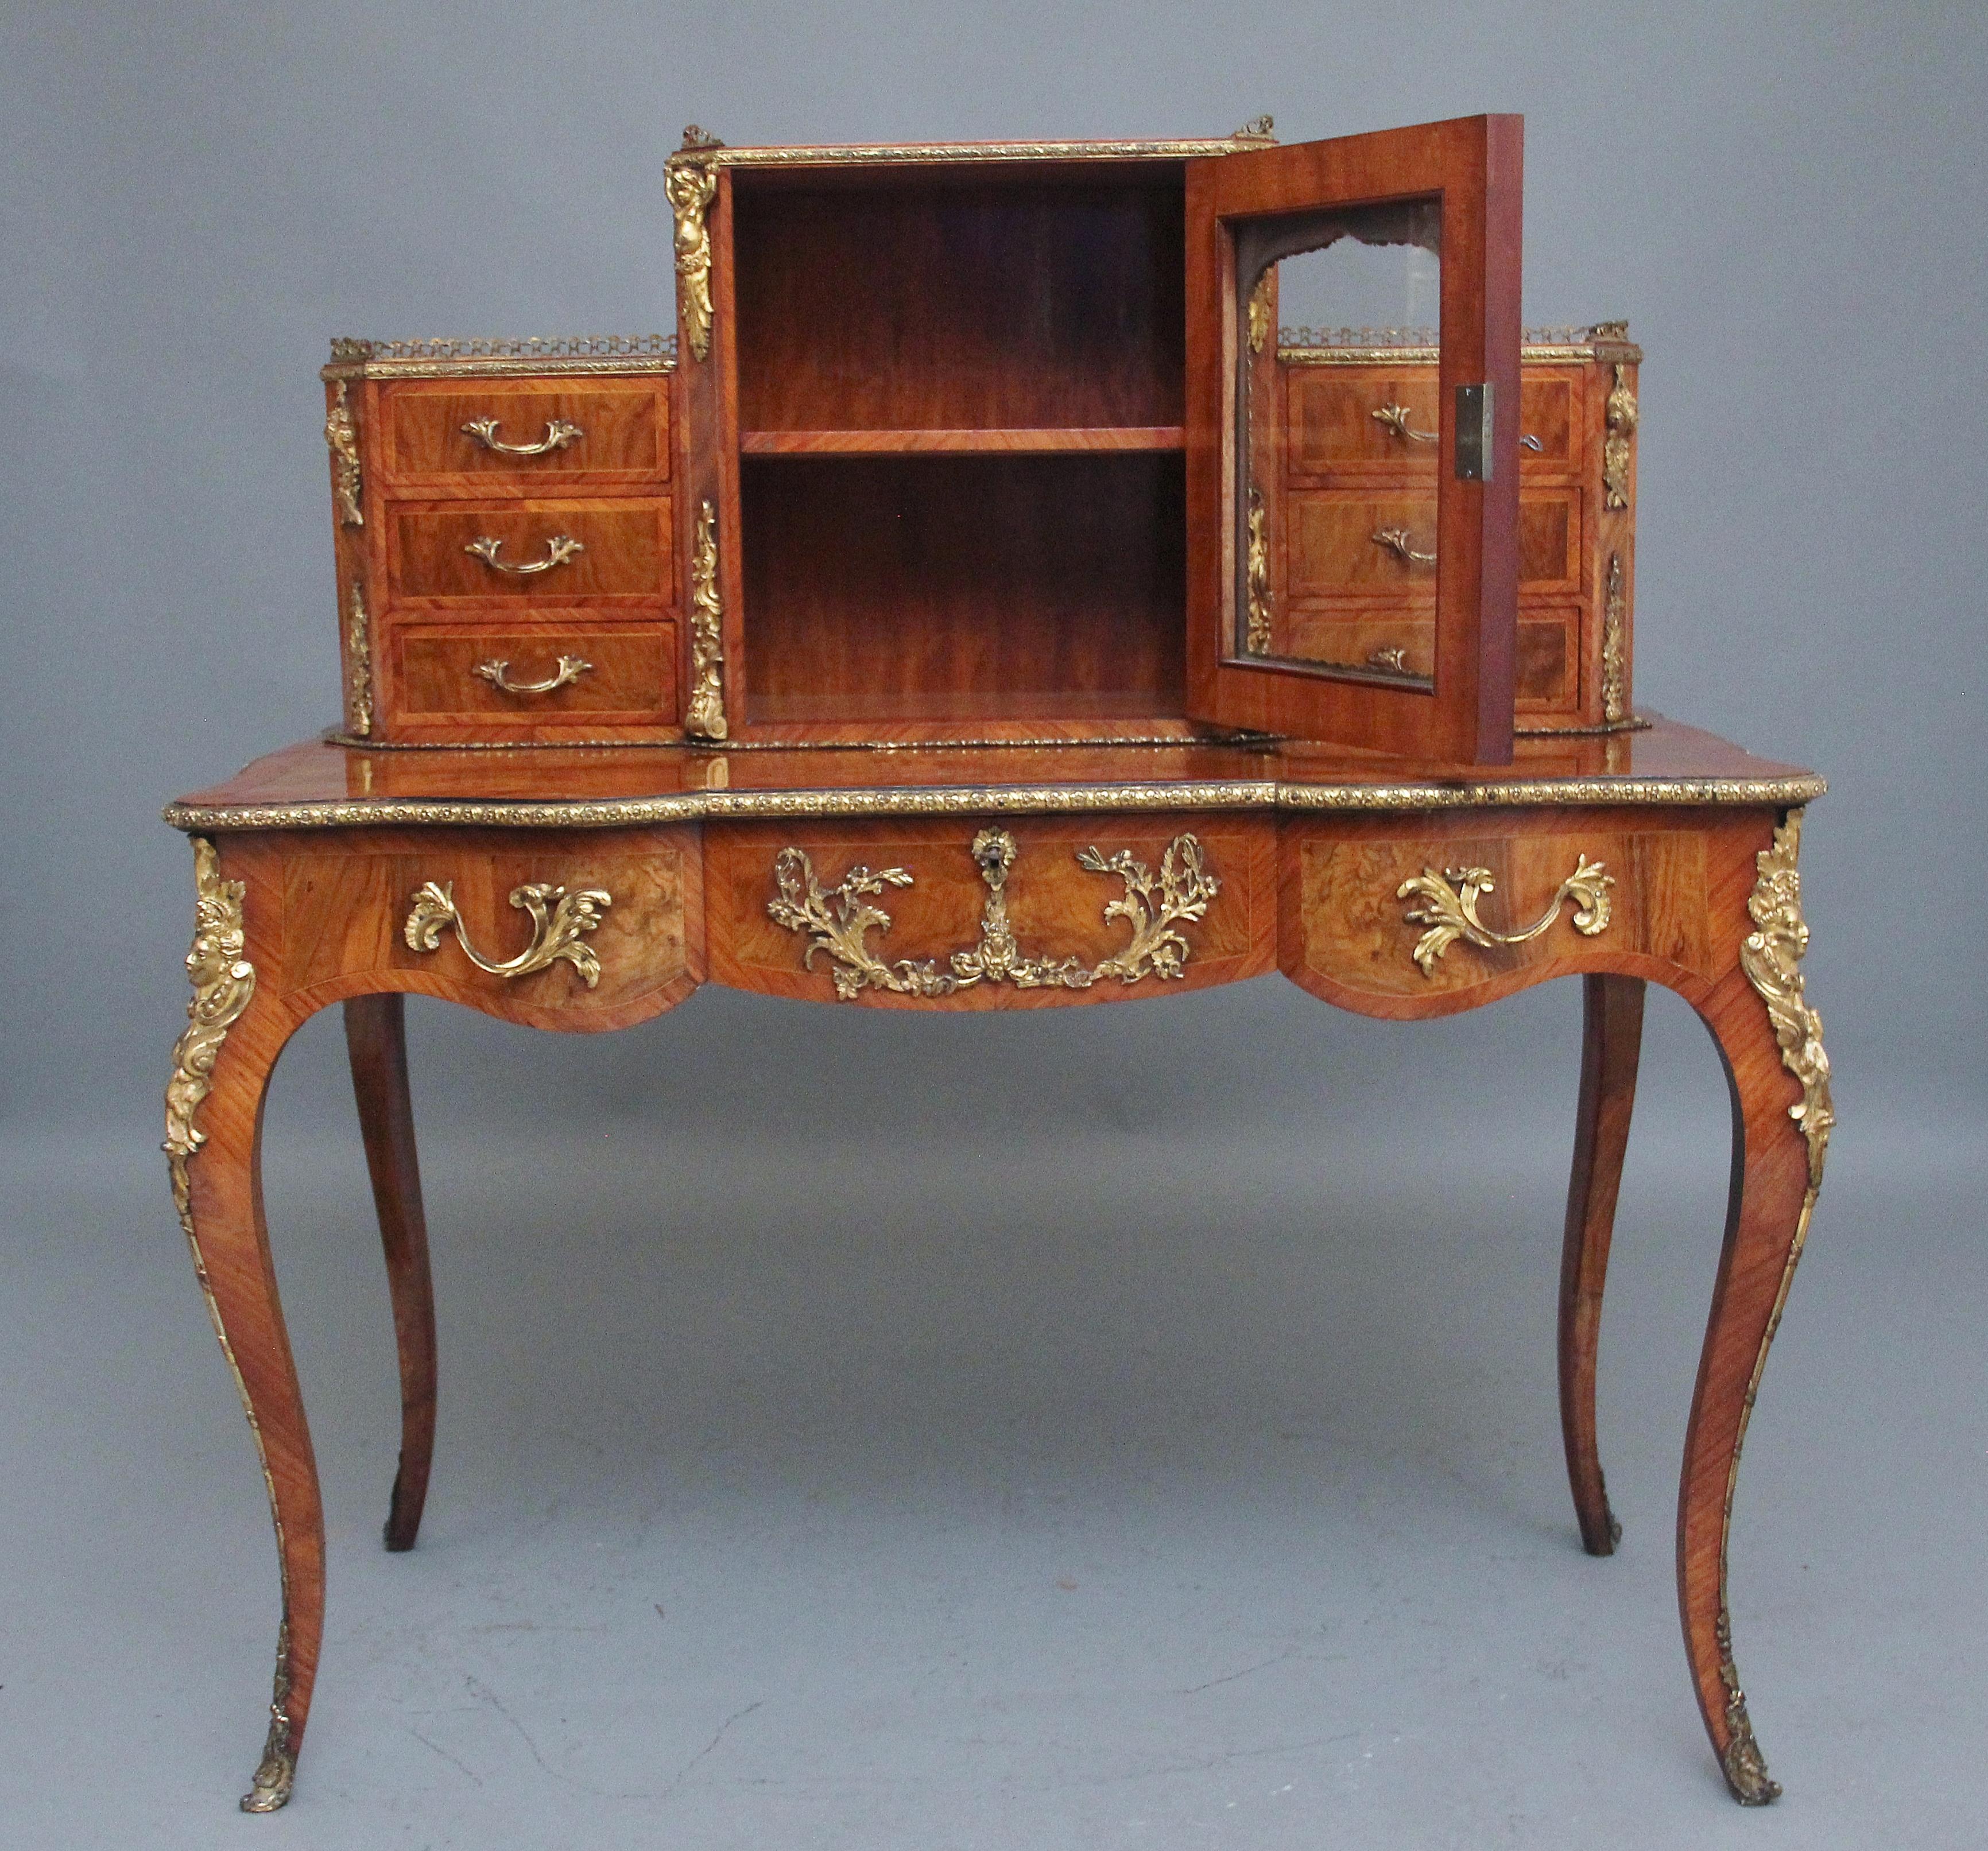 19th Century walnut desk by Gillows In Good Condition For Sale In Martlesham, GB